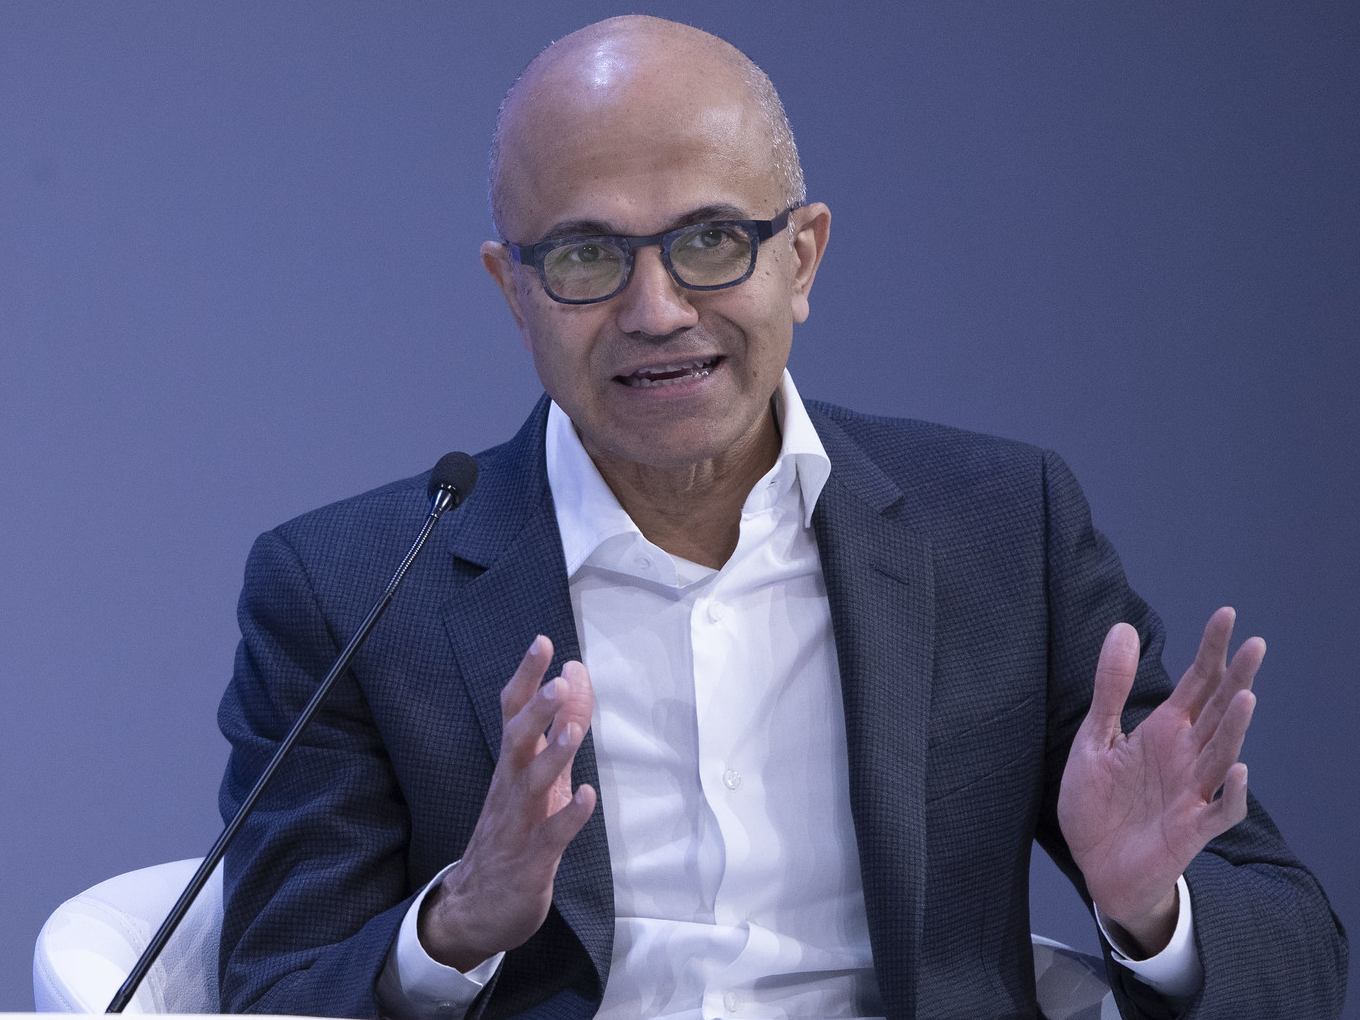 Innovative Ideas Coming Out Of Indian Startups Can Have Global Relevance: Satya Nadella